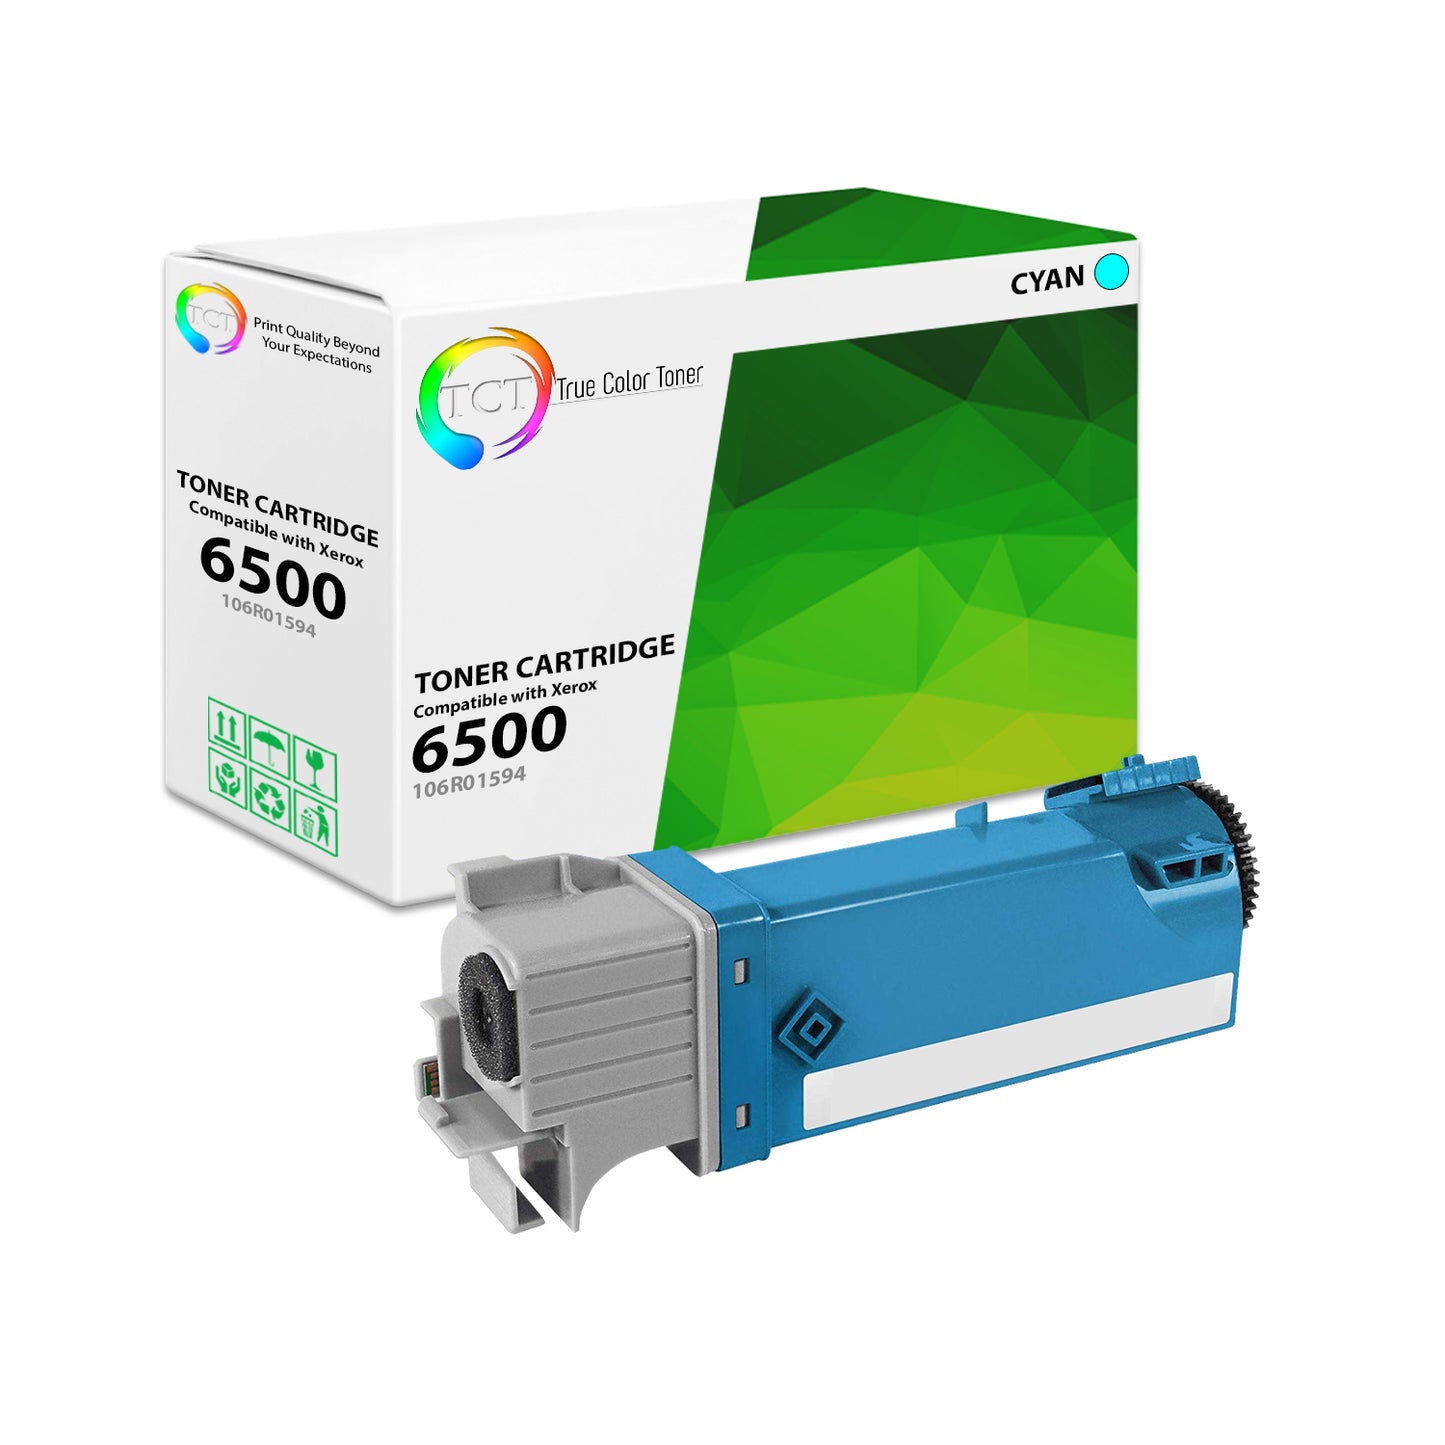 TCT Compatible Toner Cartridge Replacement for the Xerox 6500 Series - 1 Pack Cyan